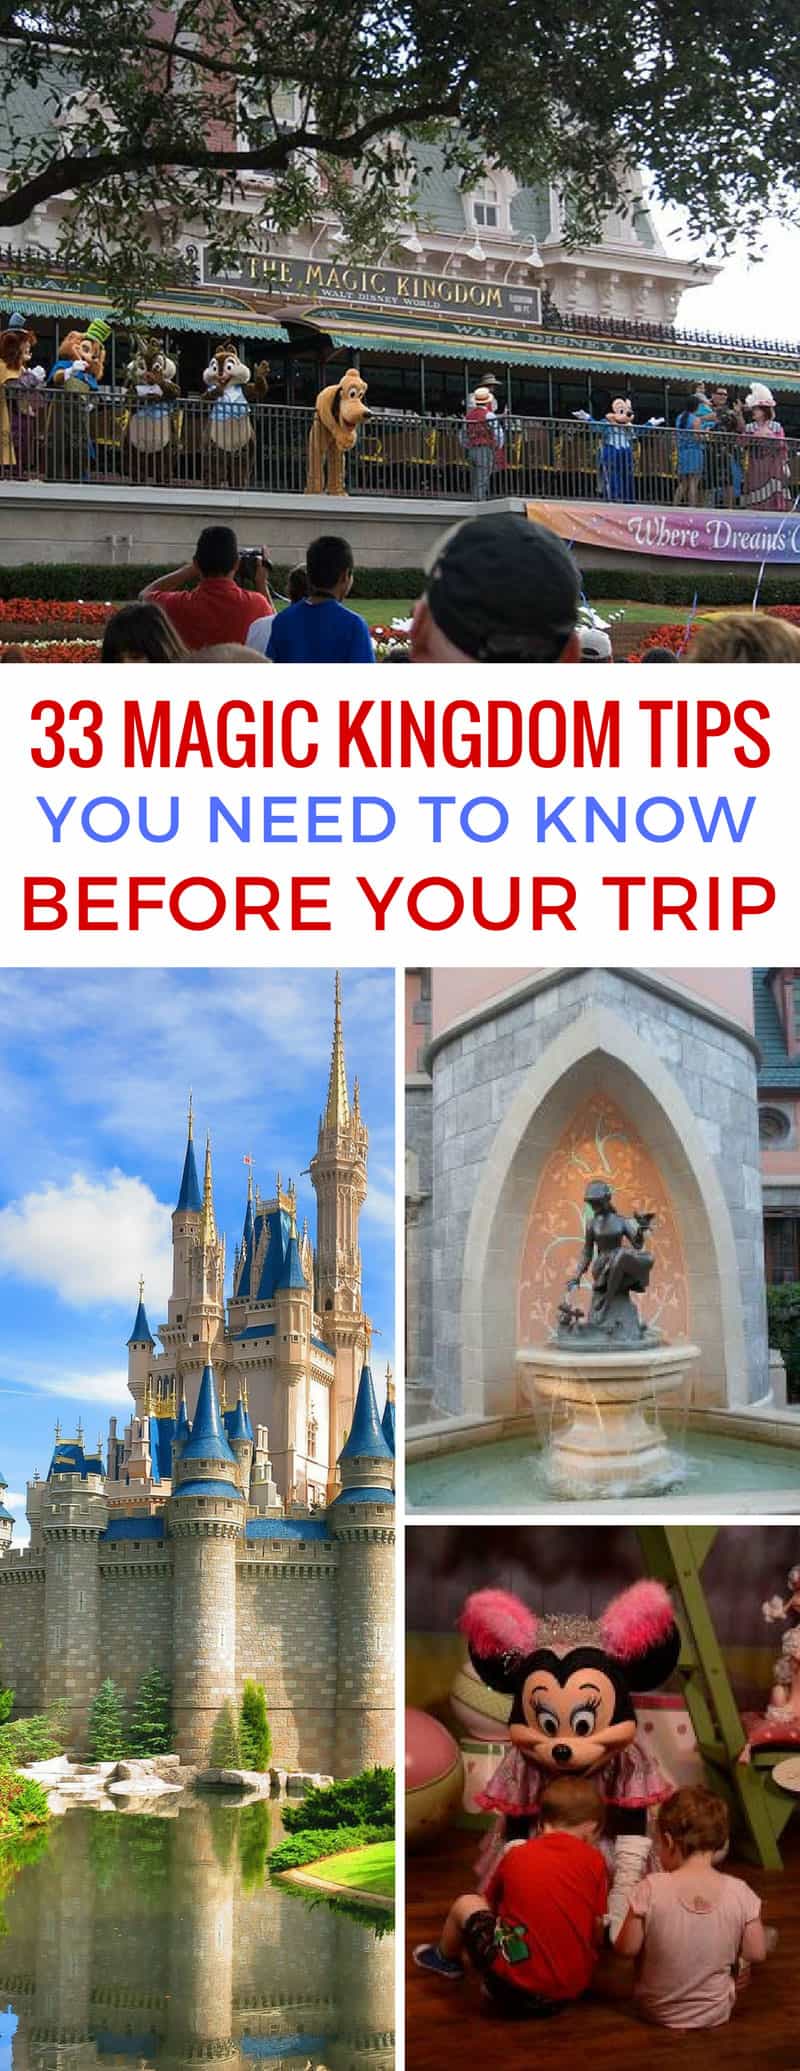 So many great Magic Kingdom tips here - definite read before your trip!